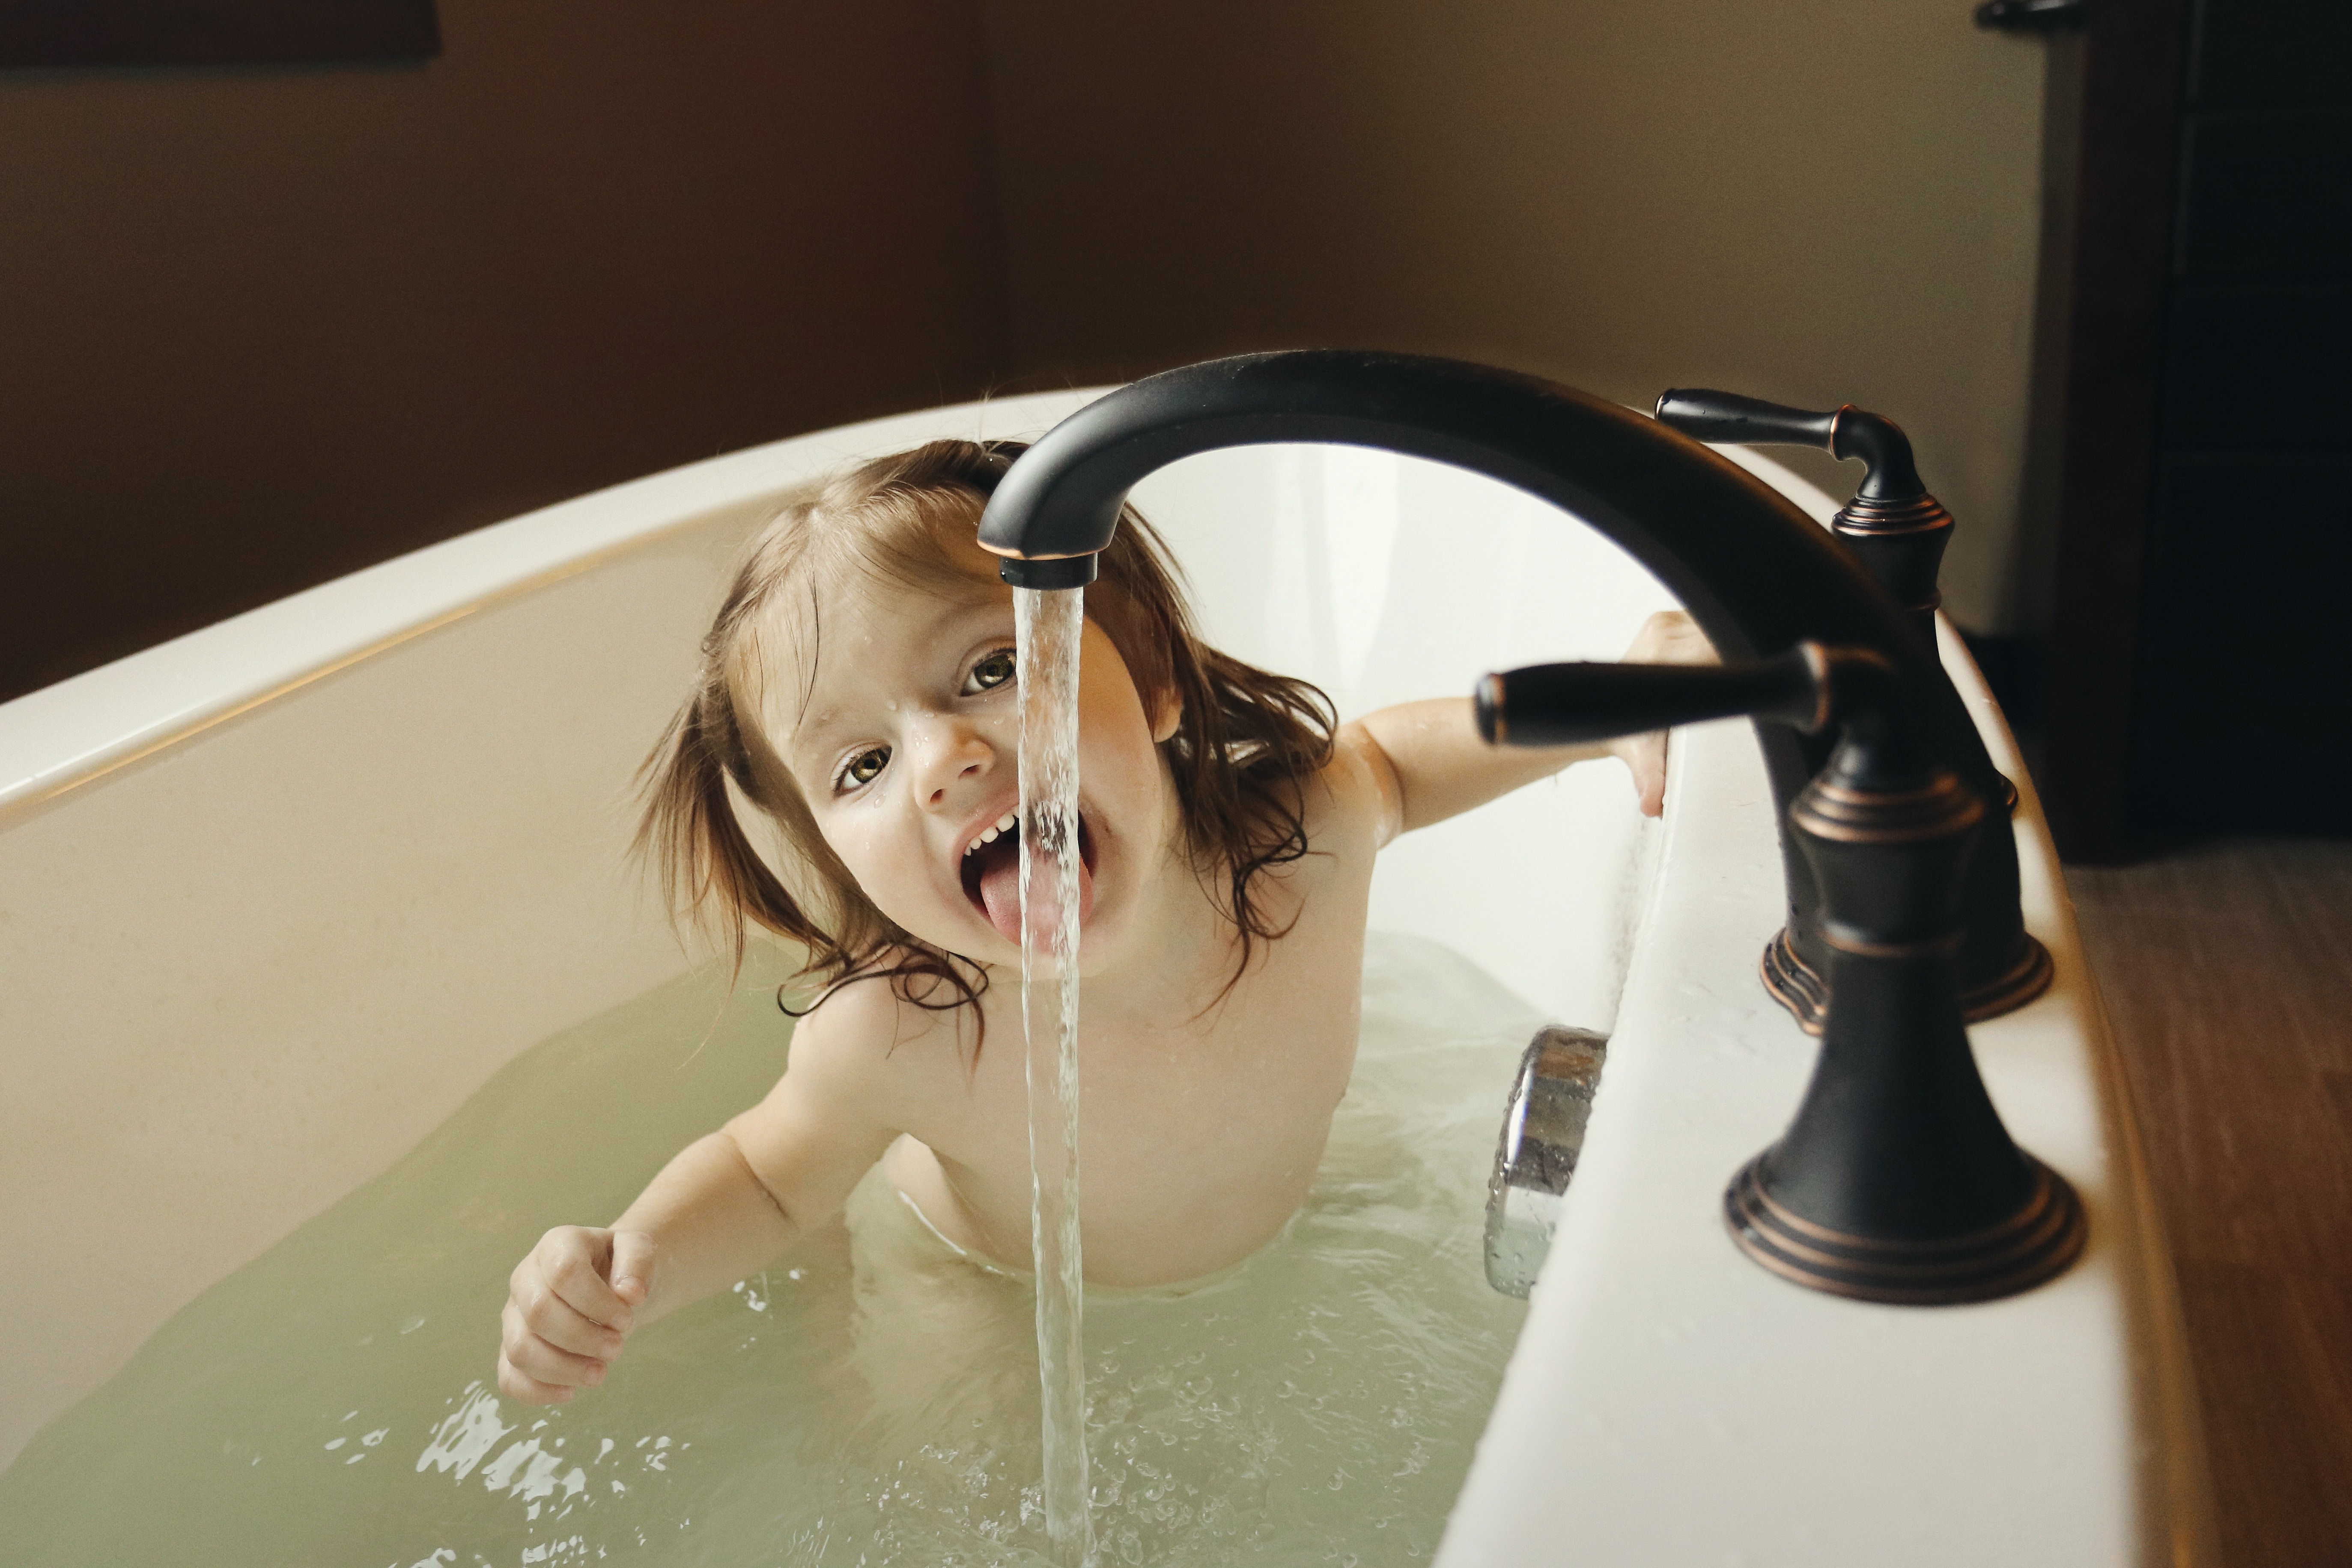  A young child taking a bath and tasting water from the tap